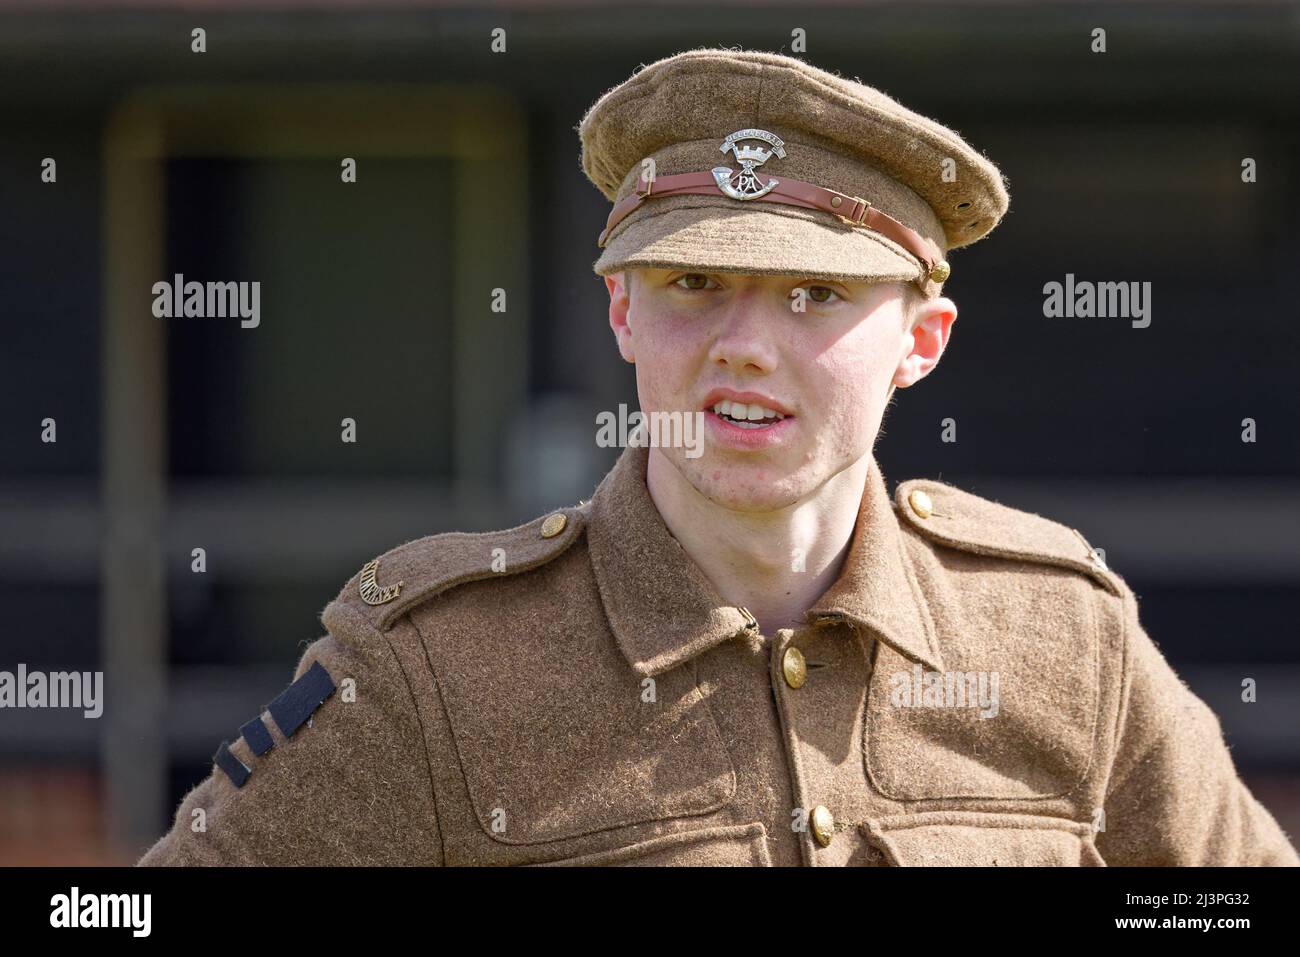 9th April 2022, Buckinghamshire, UK, re-enactors portray people of past events. Members of the West Country Tommies WW1 Re-enactors characterise Somerset Light Infantrymen complete with Jellalabad cap badge. Stock Photo